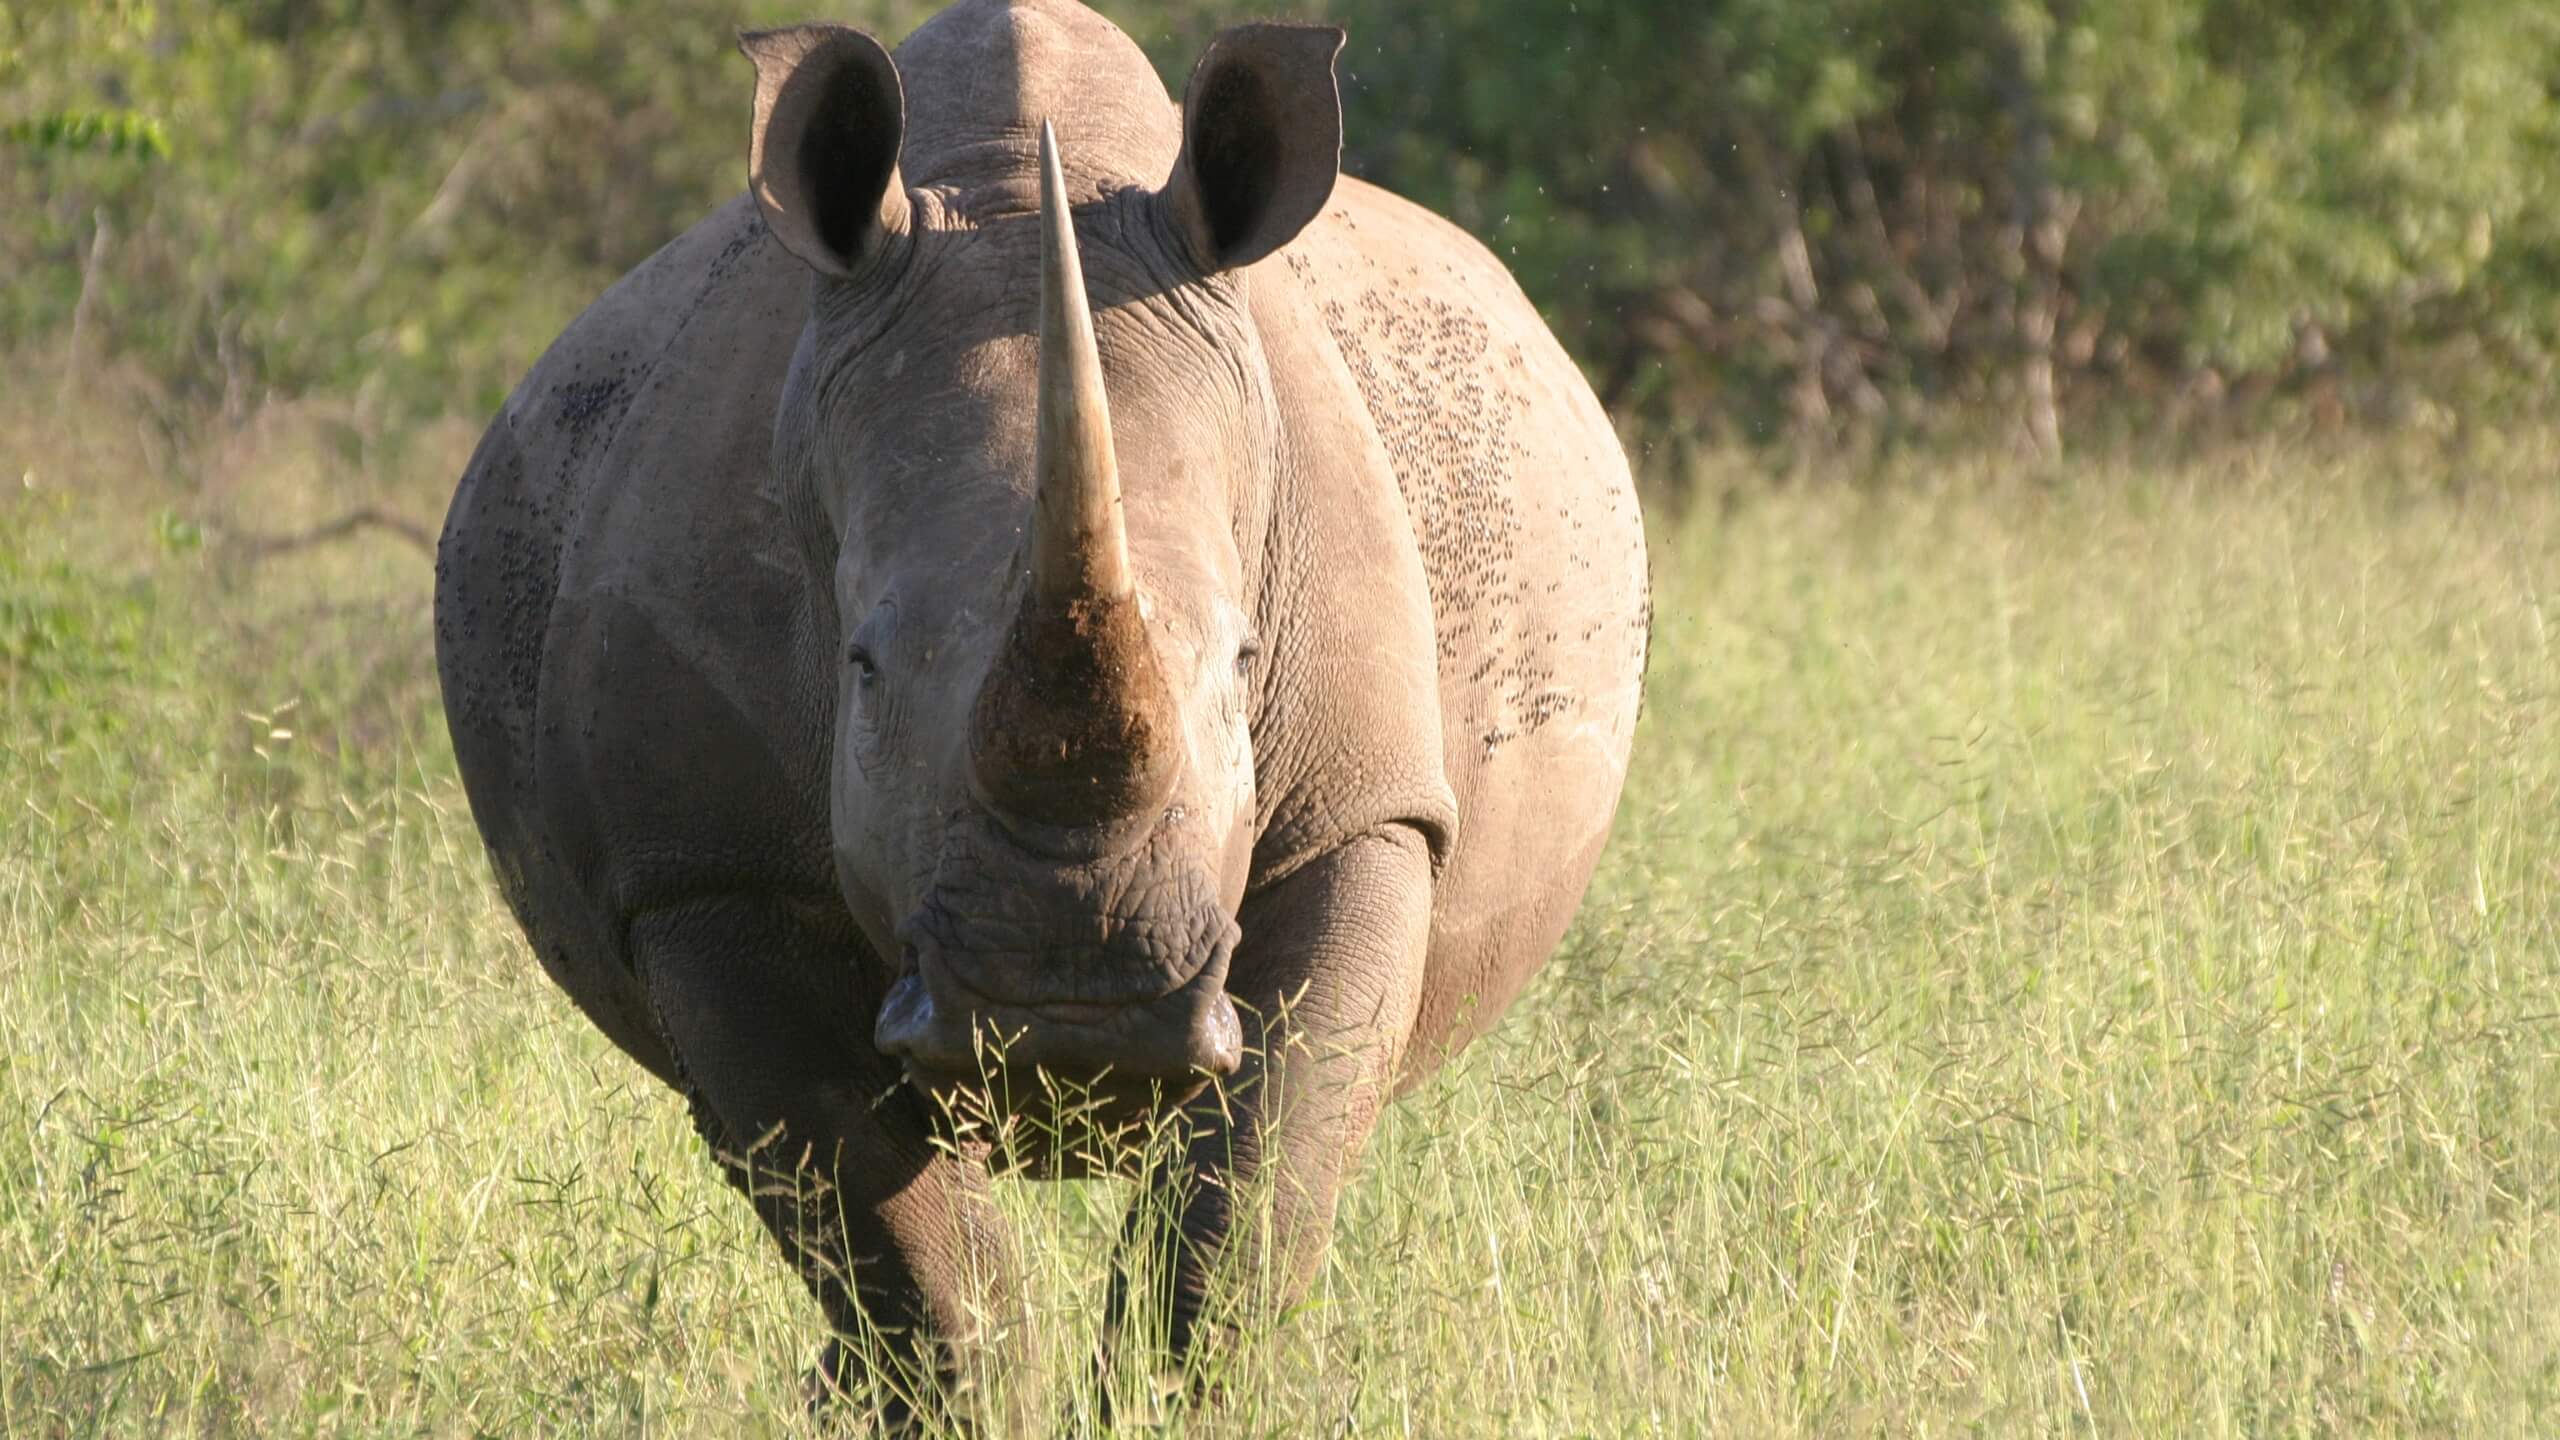 Despite their strength, rhinos usually do not pose a significant threat to humans until they are disturbed by activities like poaching or encroaching on their habitat. So humans need to stay away from their habitat and never disturb or approach them.